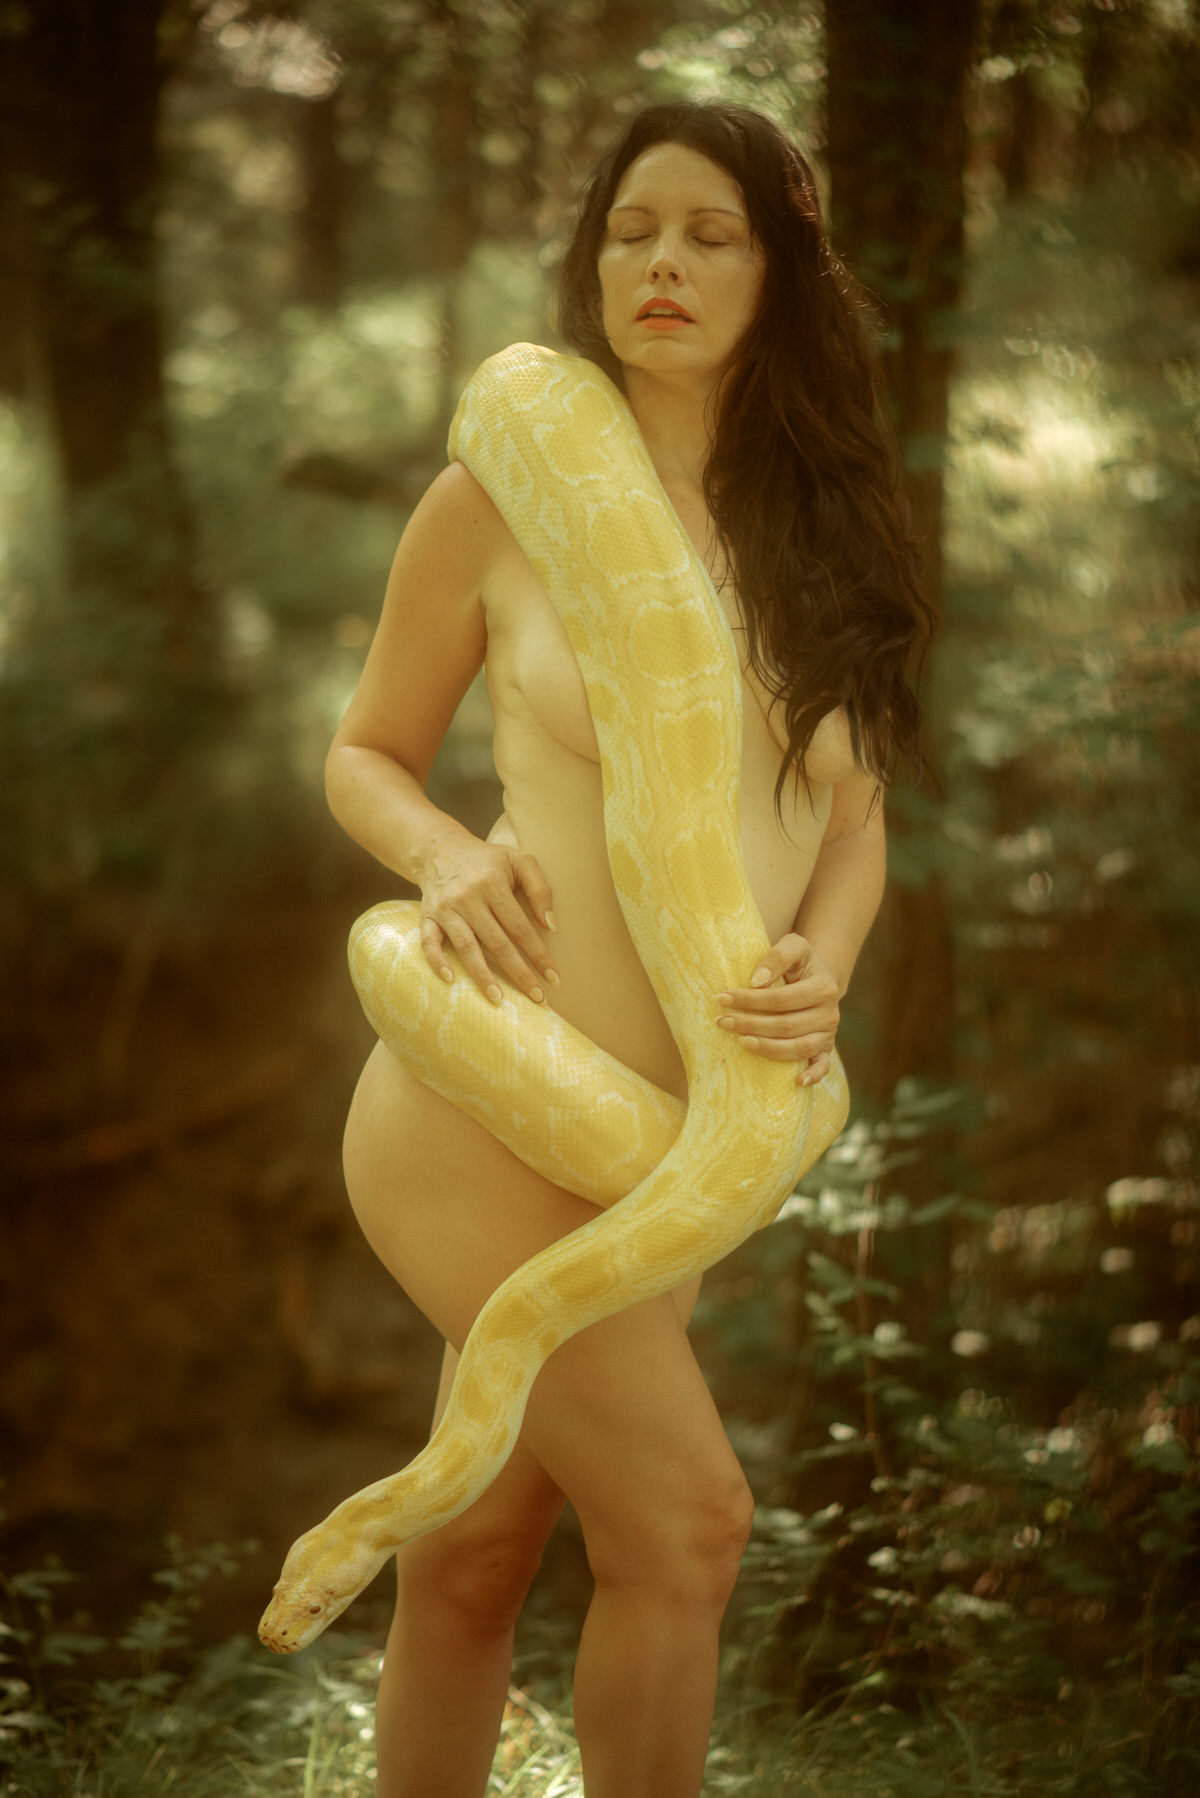 A woman in the forest holding a giant snake.